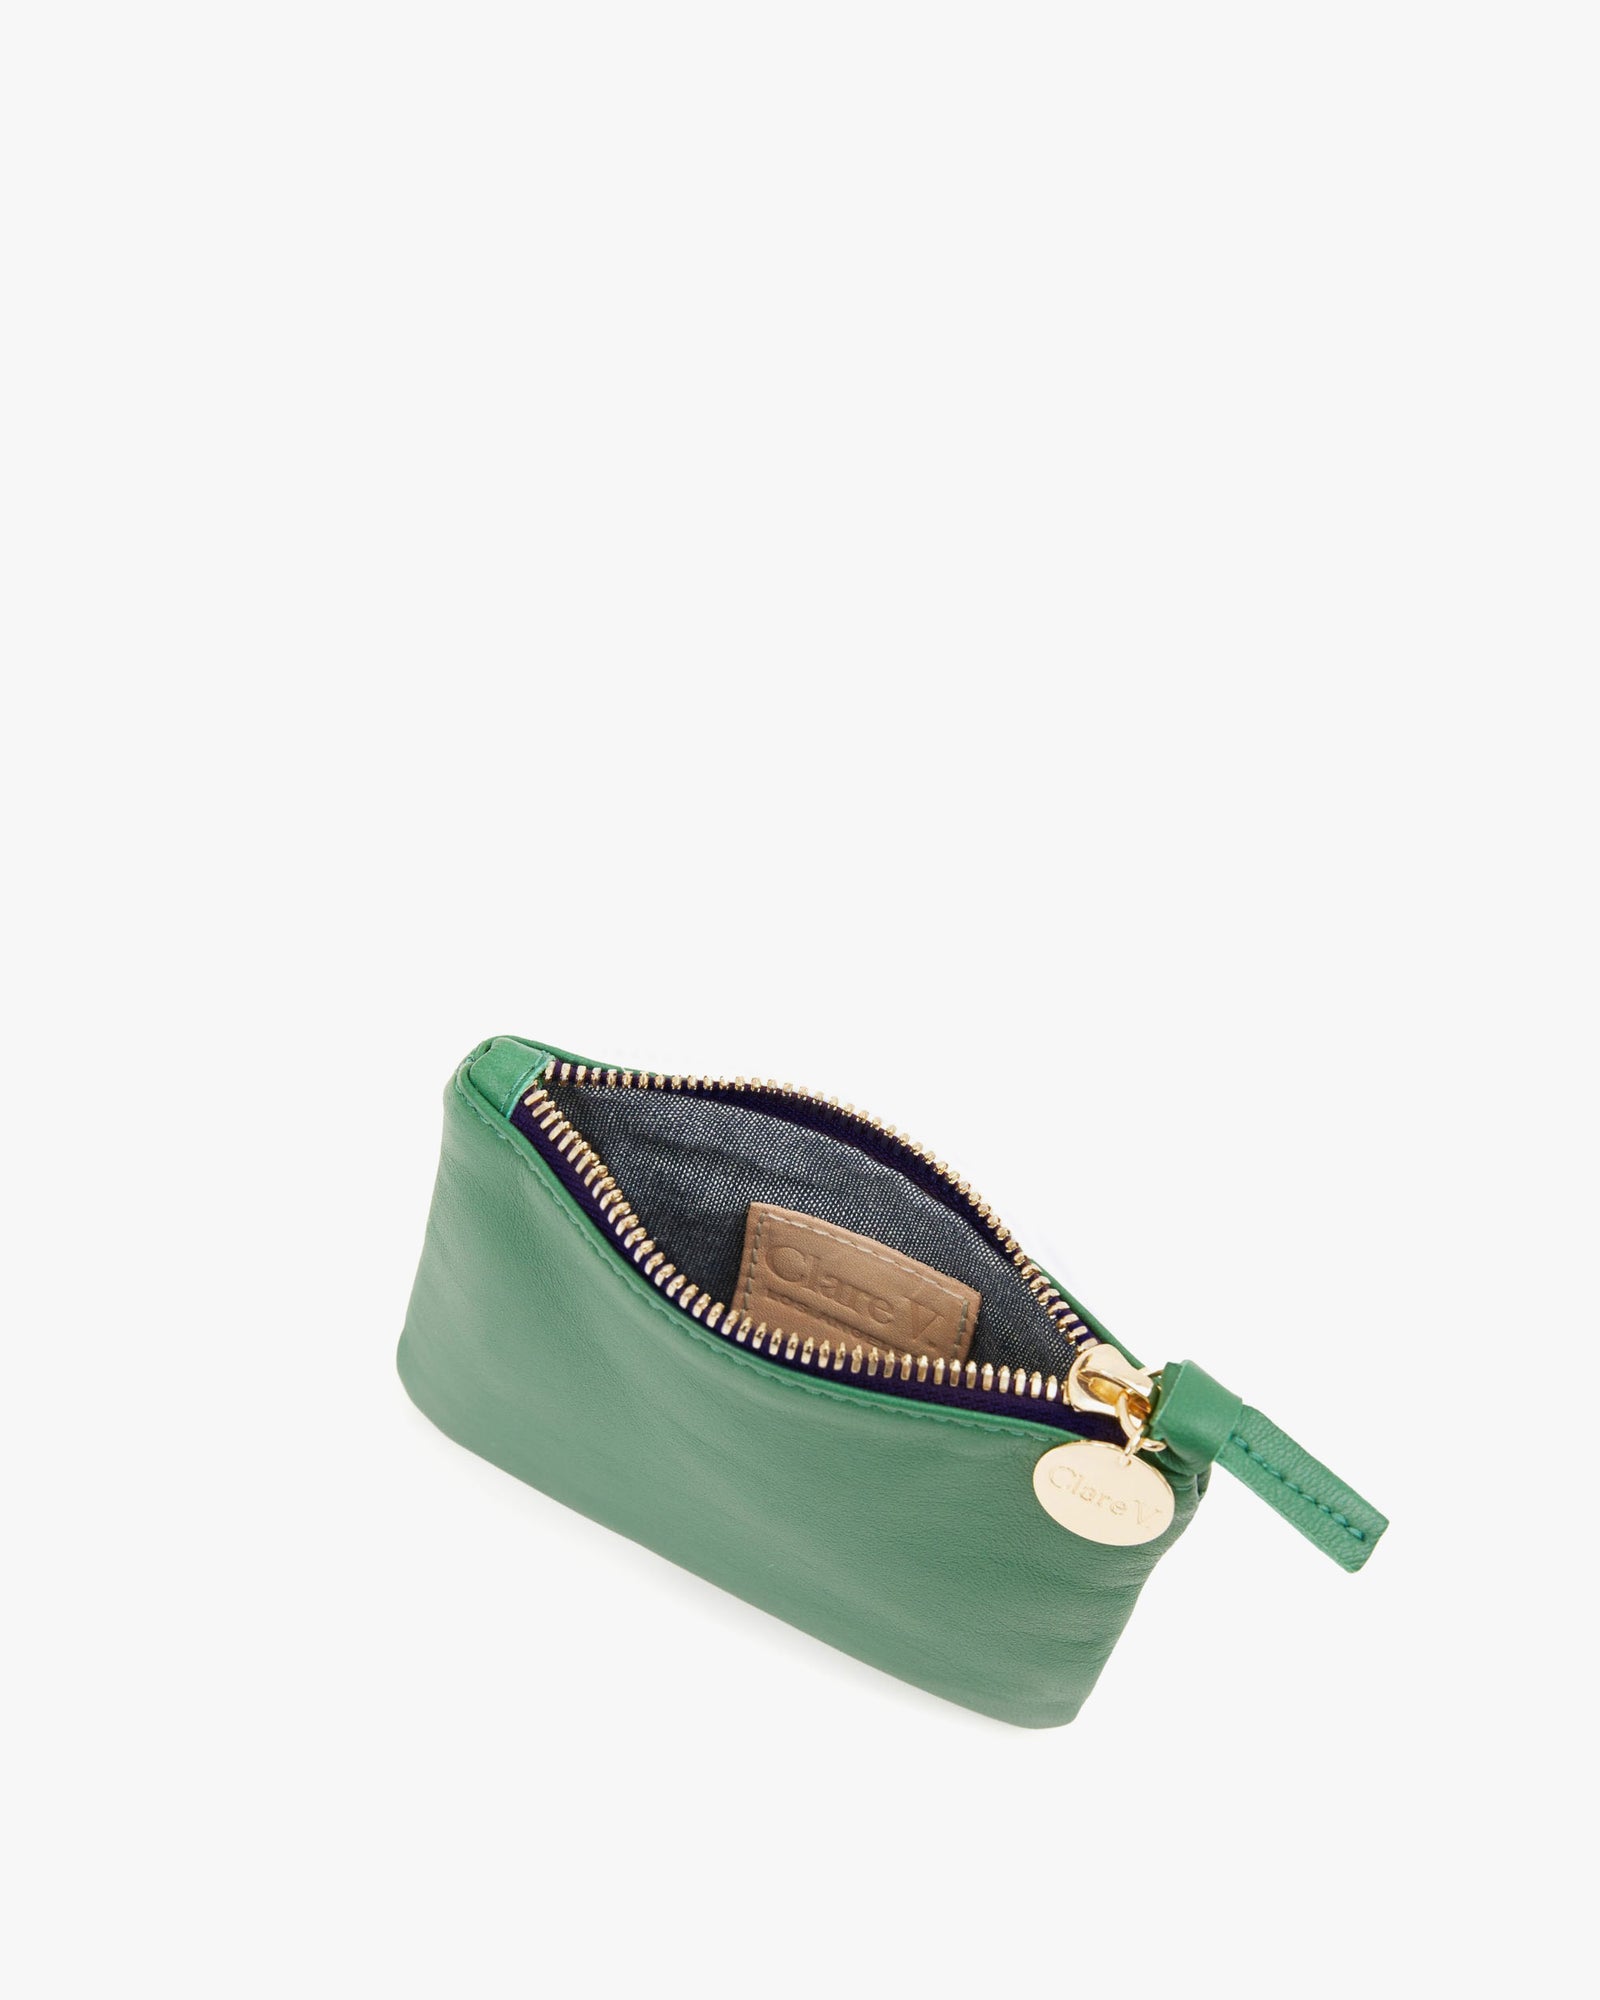 clare v coin clutch